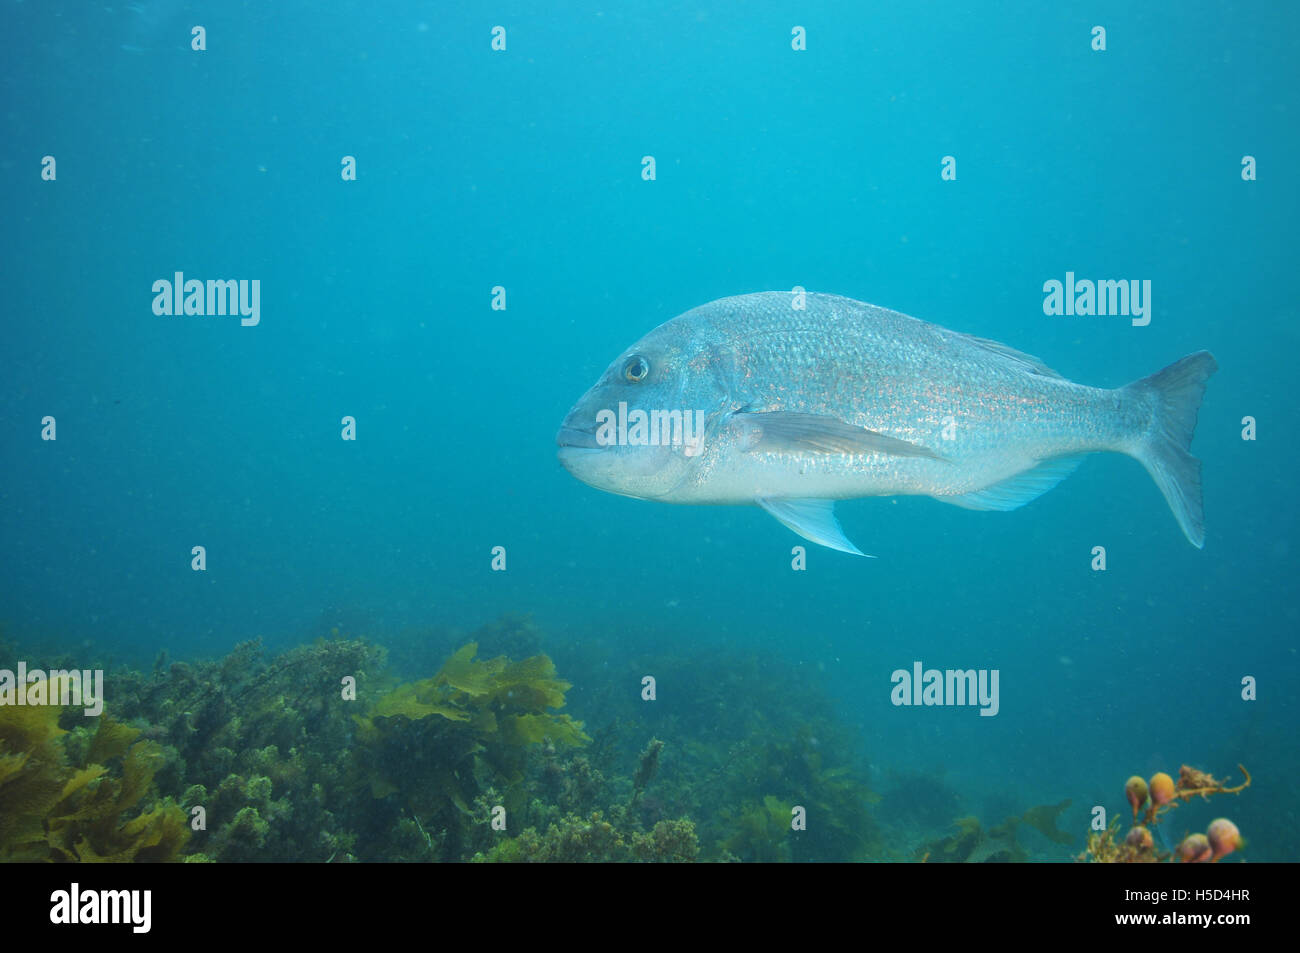 Adult australasian snapper cruising by Stock Photo